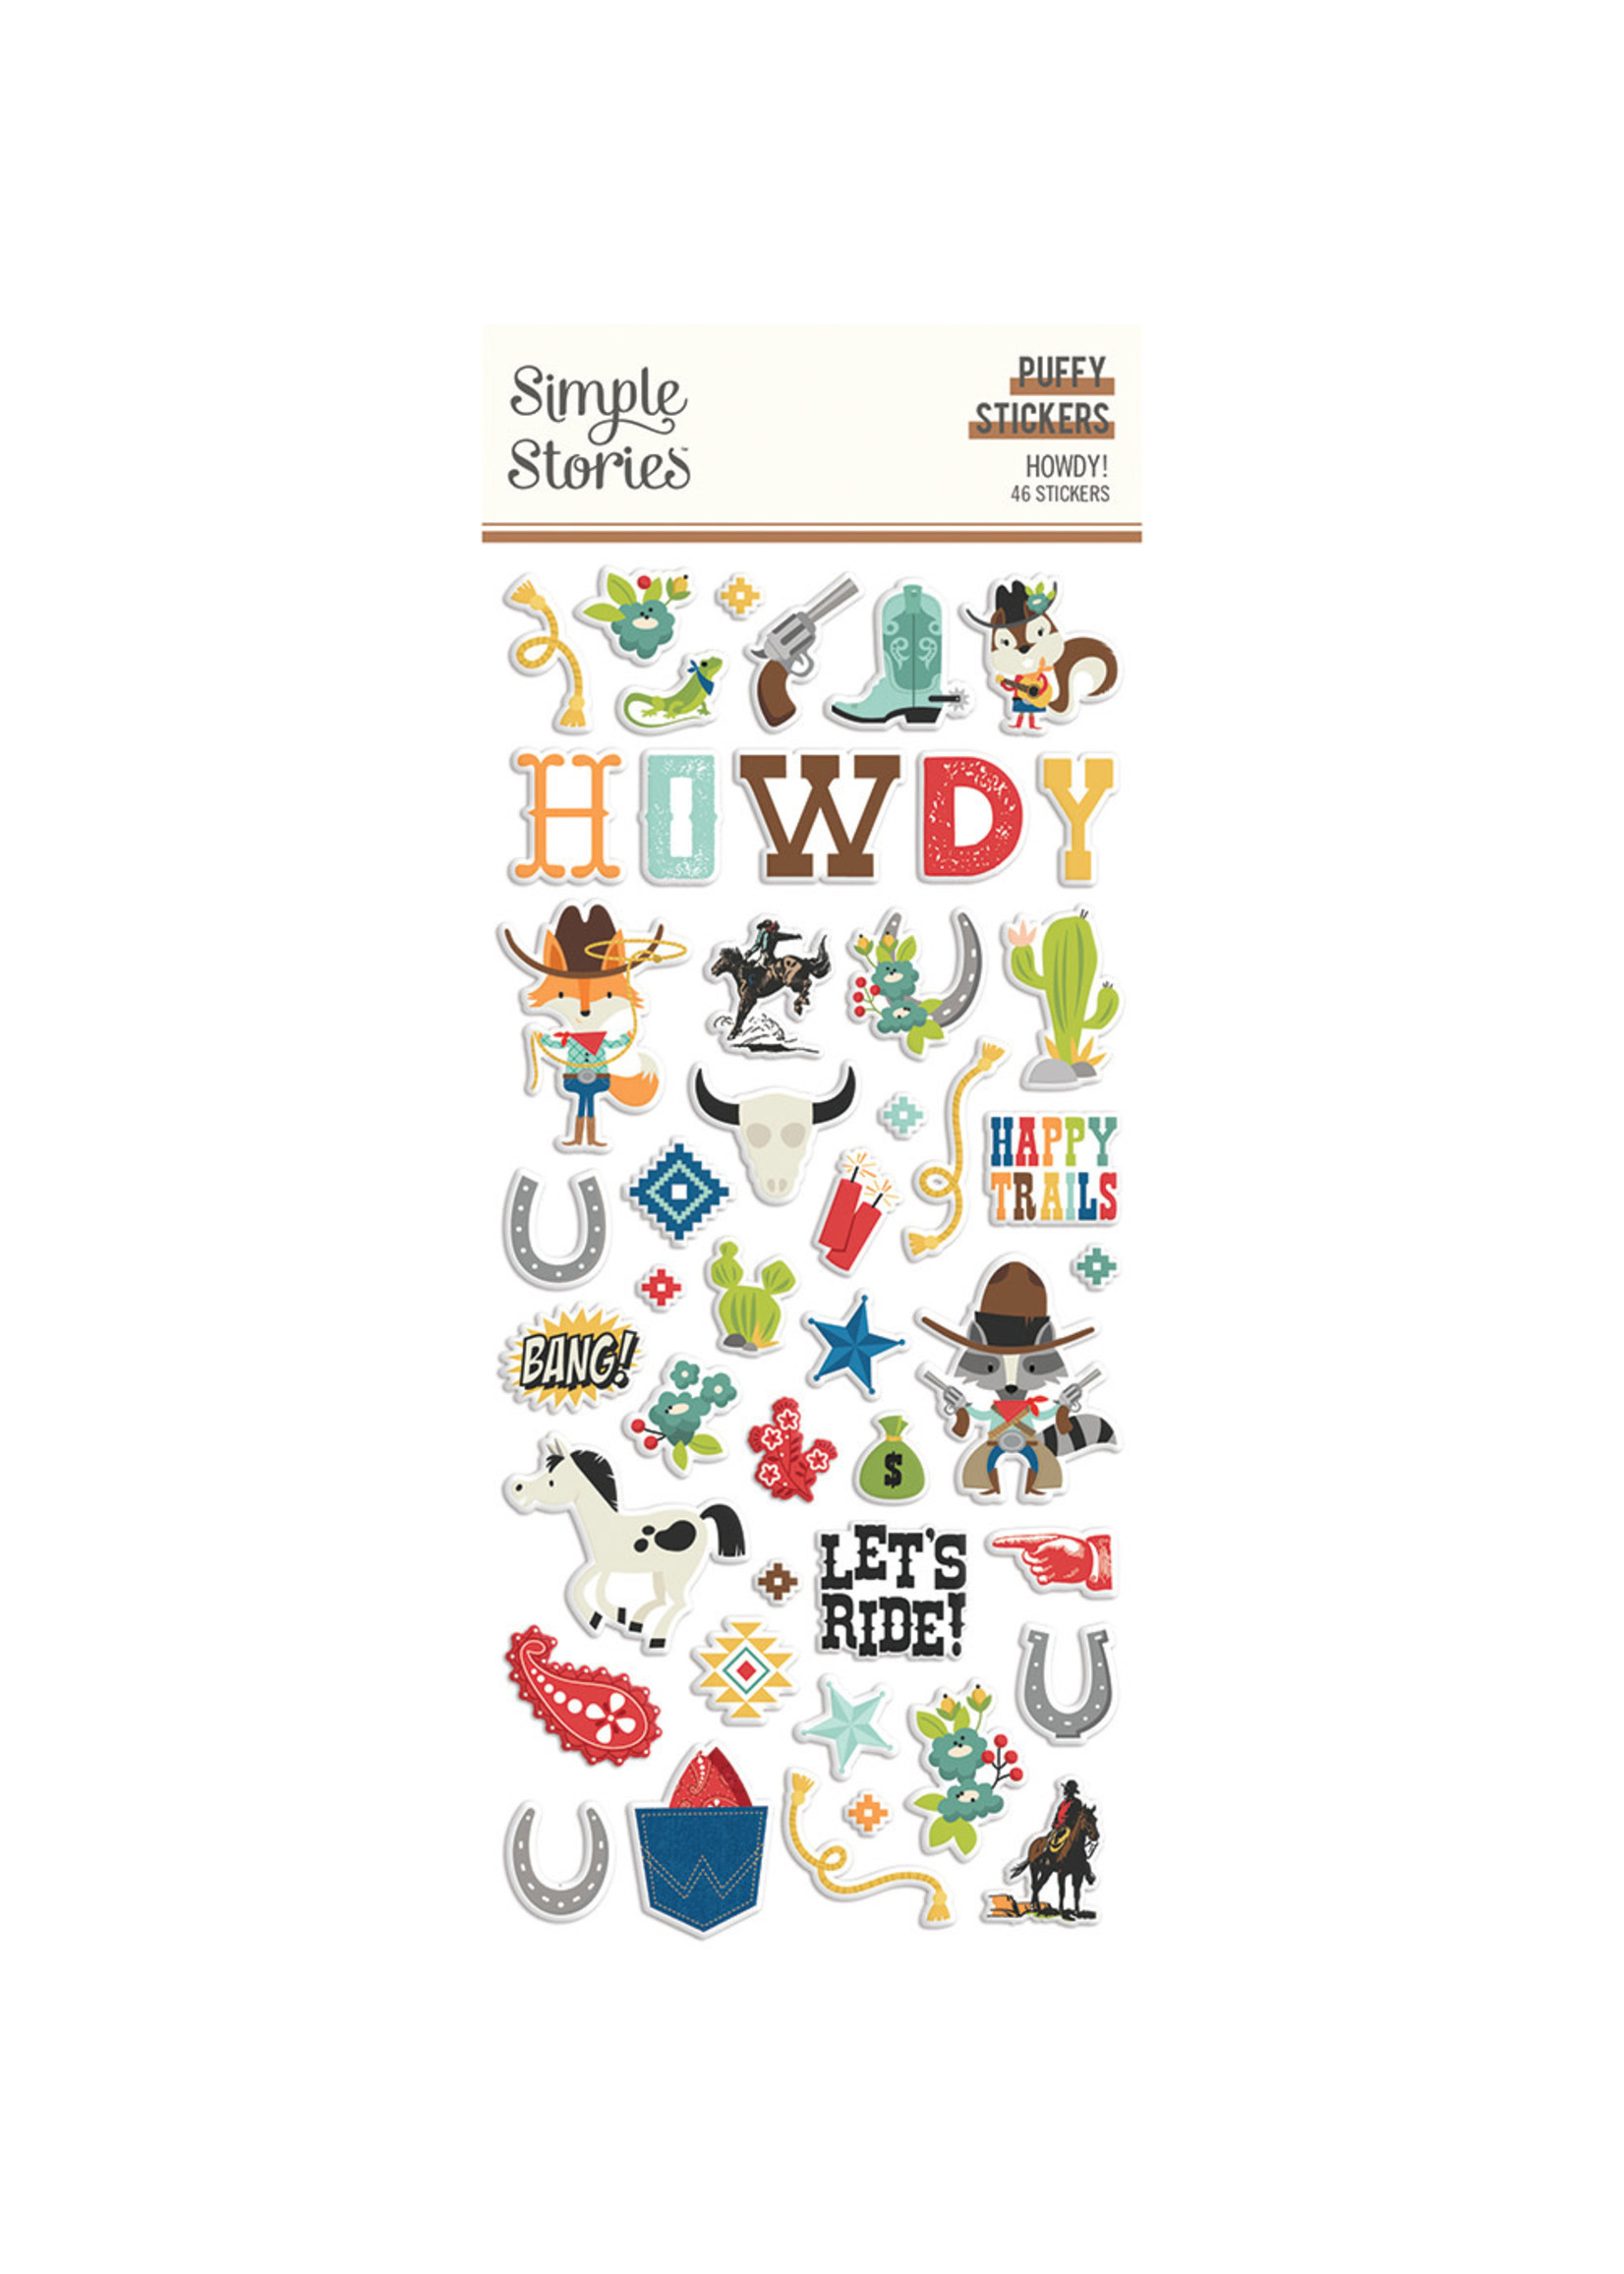 Simple Stories Howdy! - Puffy Stickers